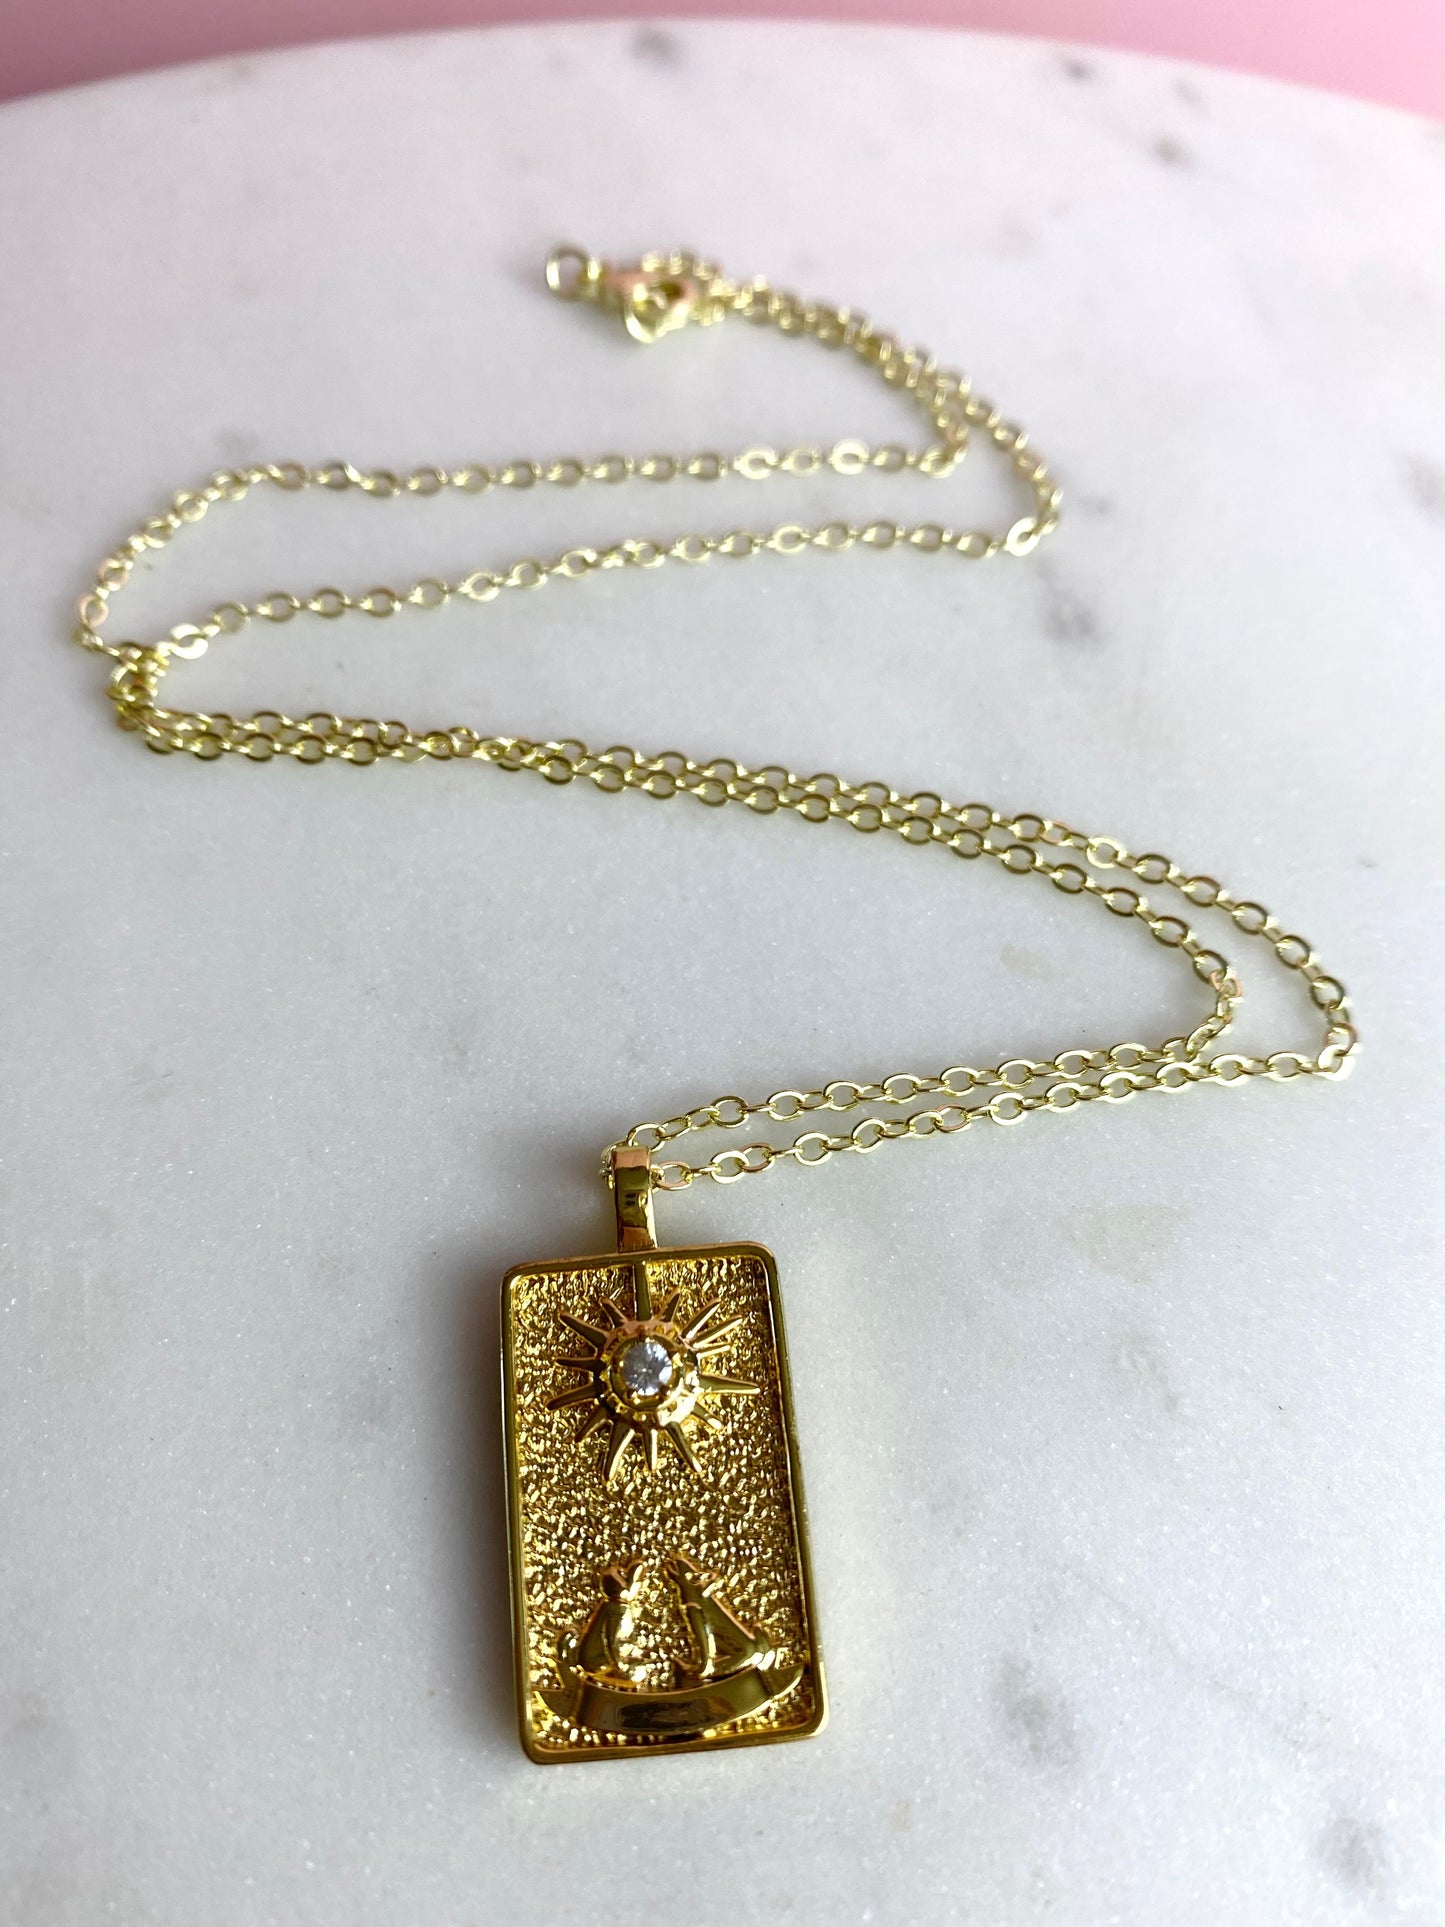 The Star Tarot Card Gold-Plated Charm Necklace | Handmade Jewelry